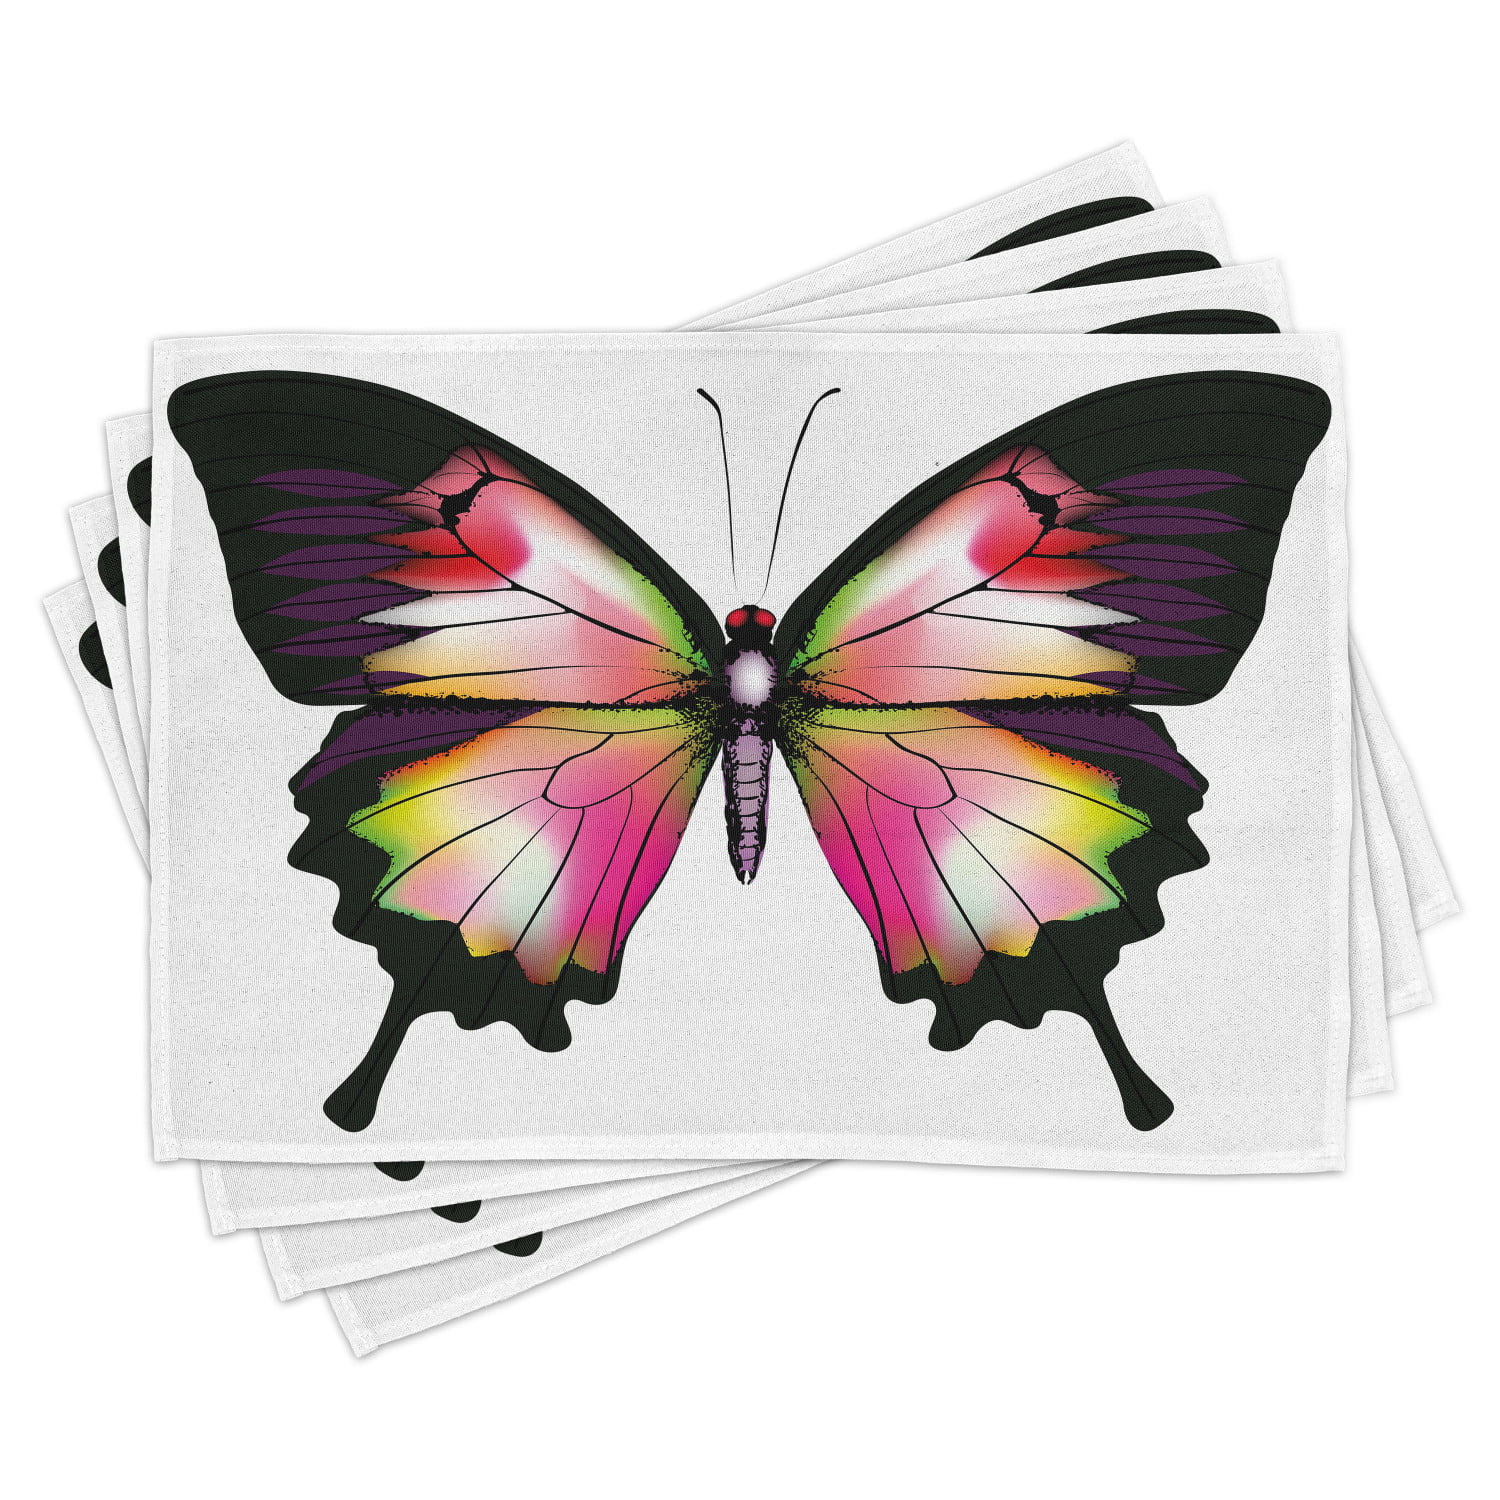 Butterfly Design Set of 4 Placemats Deluxe Vinyl Non-slip Ease Care